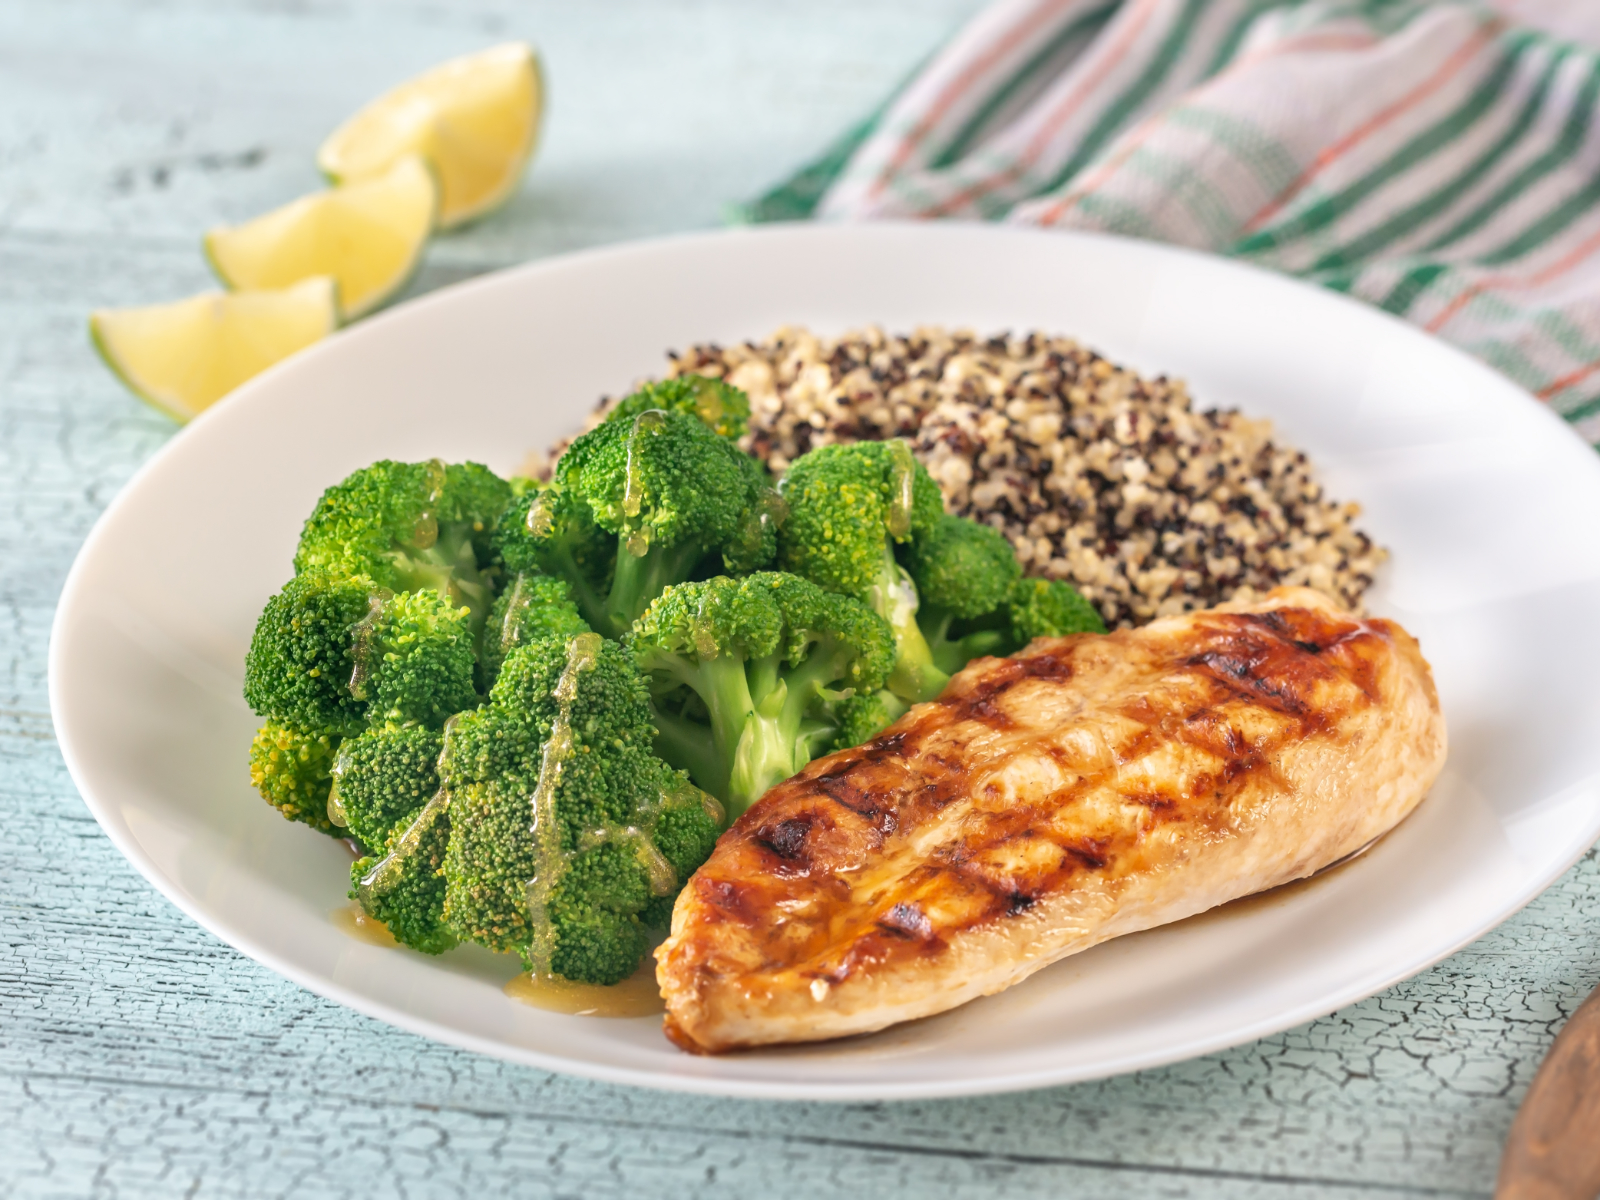 Grilled chicken breast with a side of quinoa and steamed broccoli